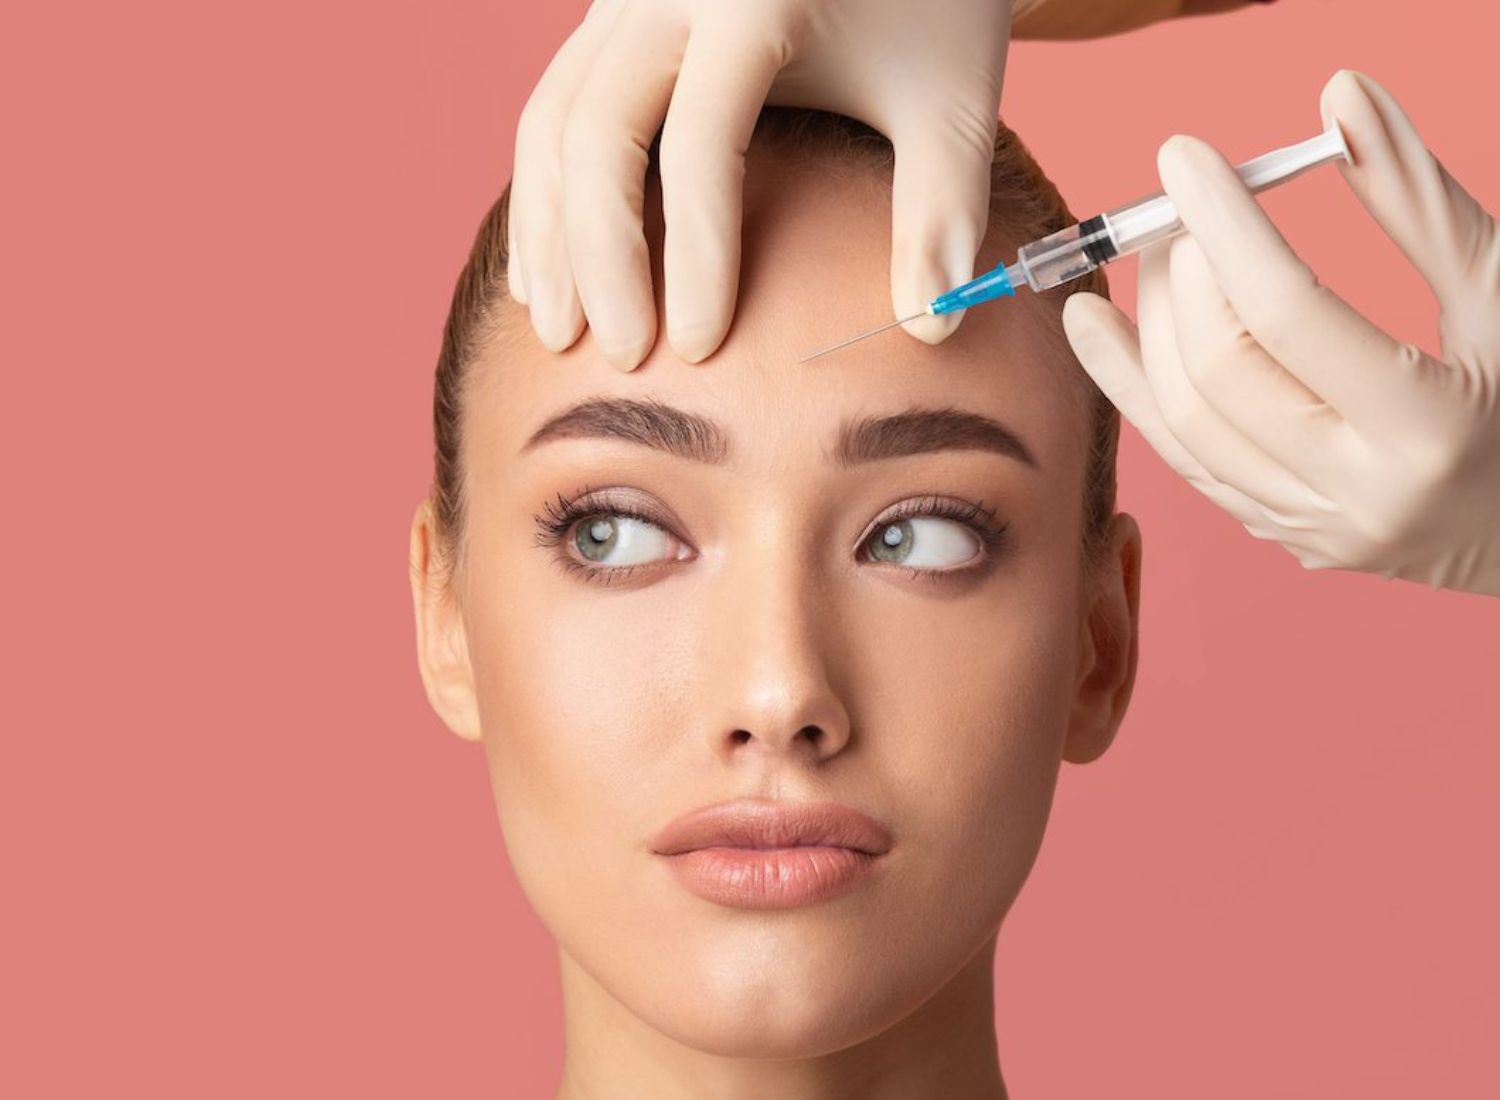 Things You Should Know Before Botox Injections